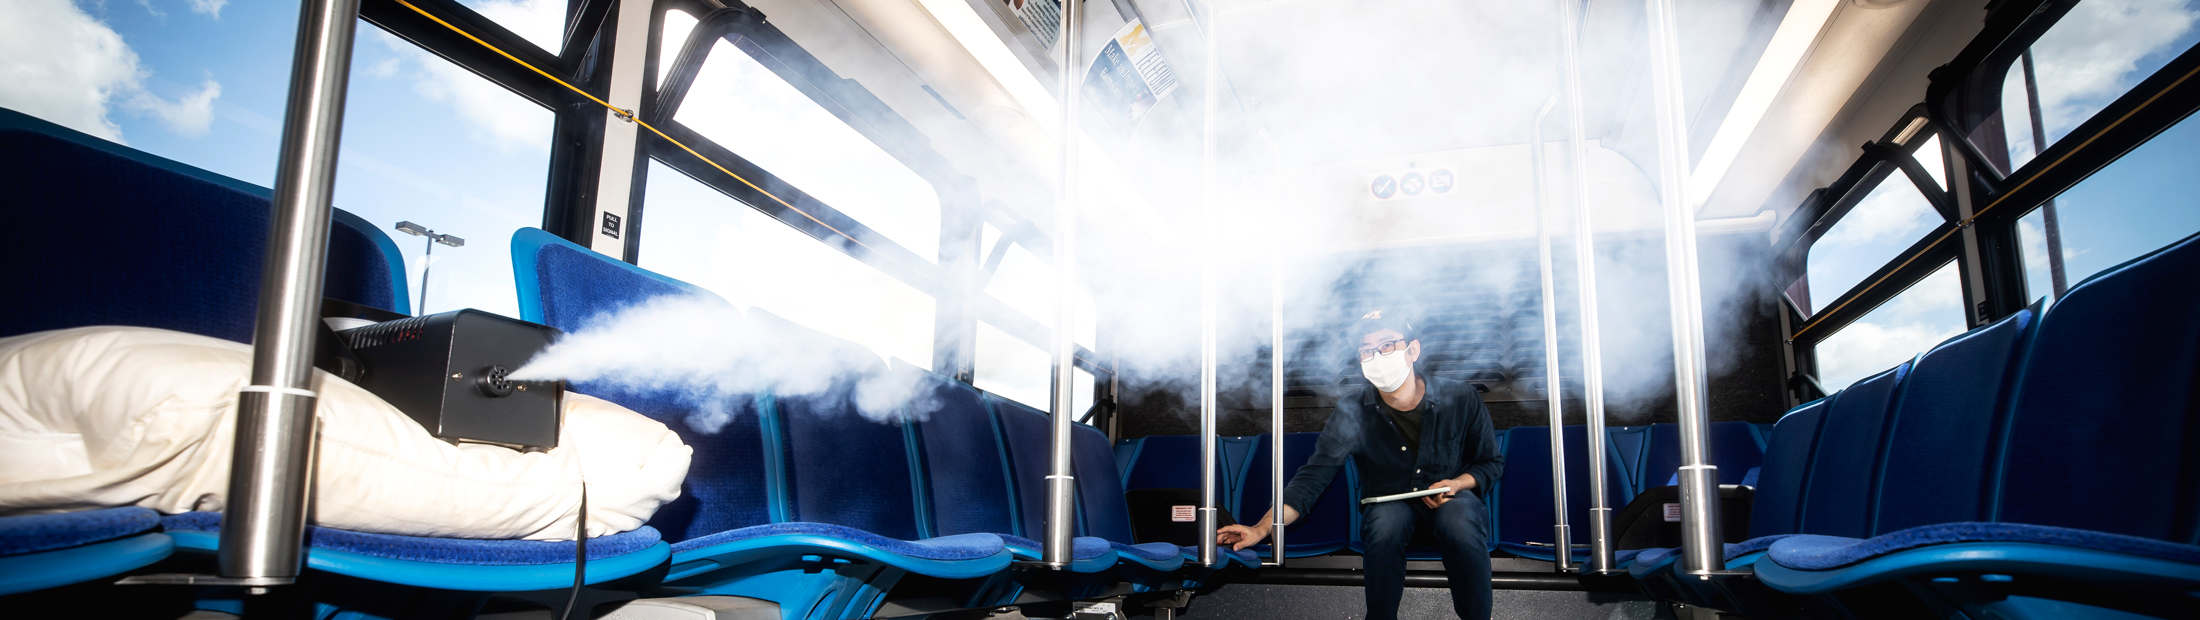 Kwang Hee Yoo, ME Researcher, measures the flow of aerosols in a University of Michigan blue bus.